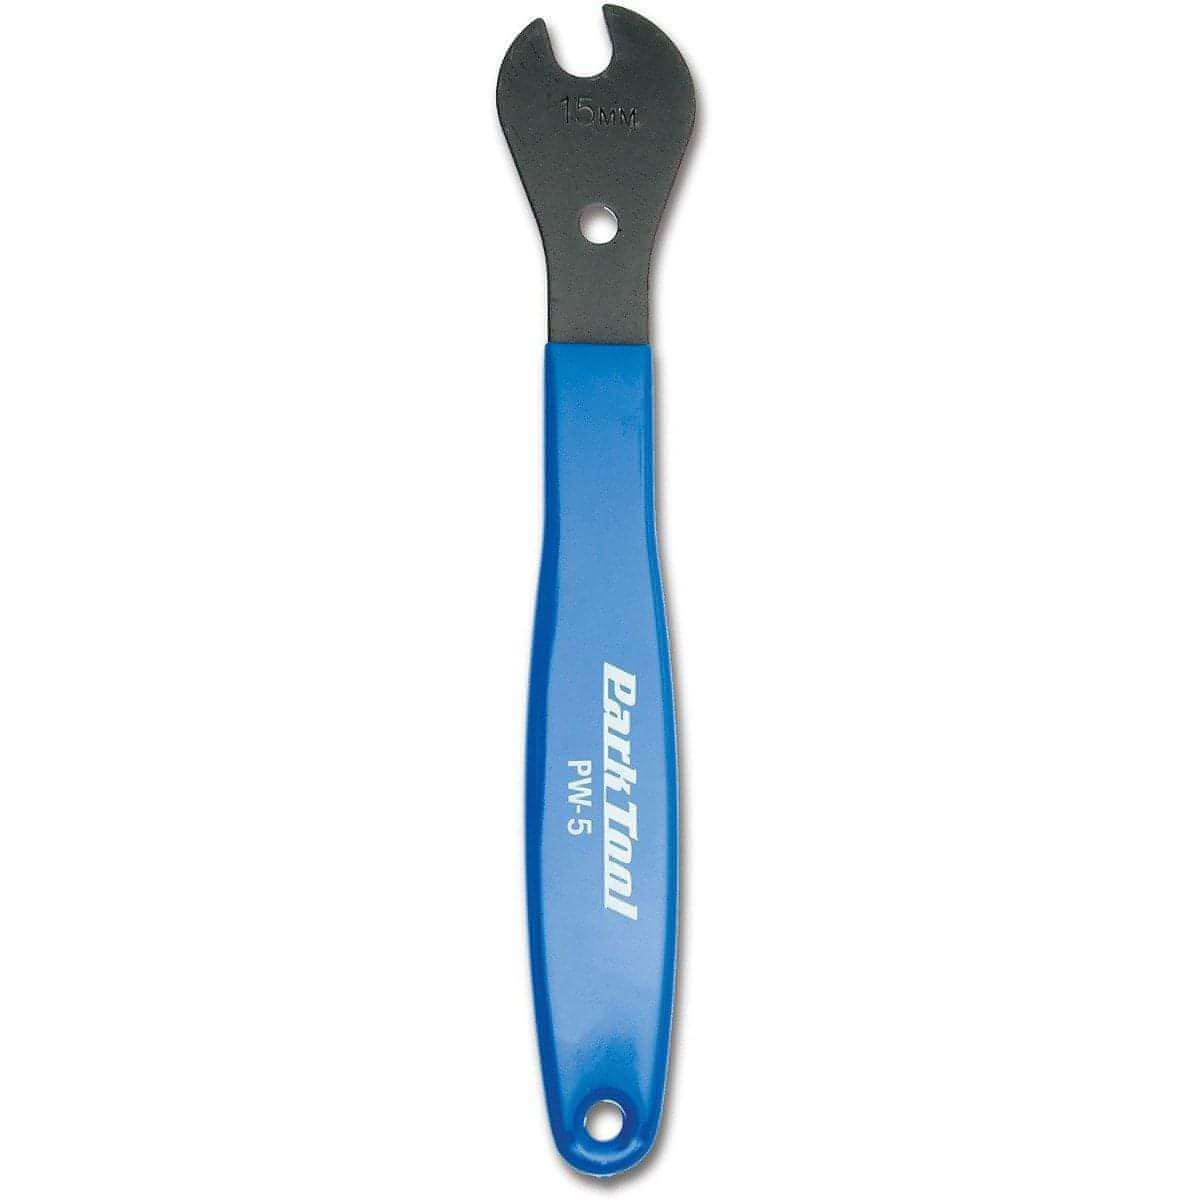 Park Tool PW-5 Home Mechanic Pedal Wrench 763477005632 - Start Fitness